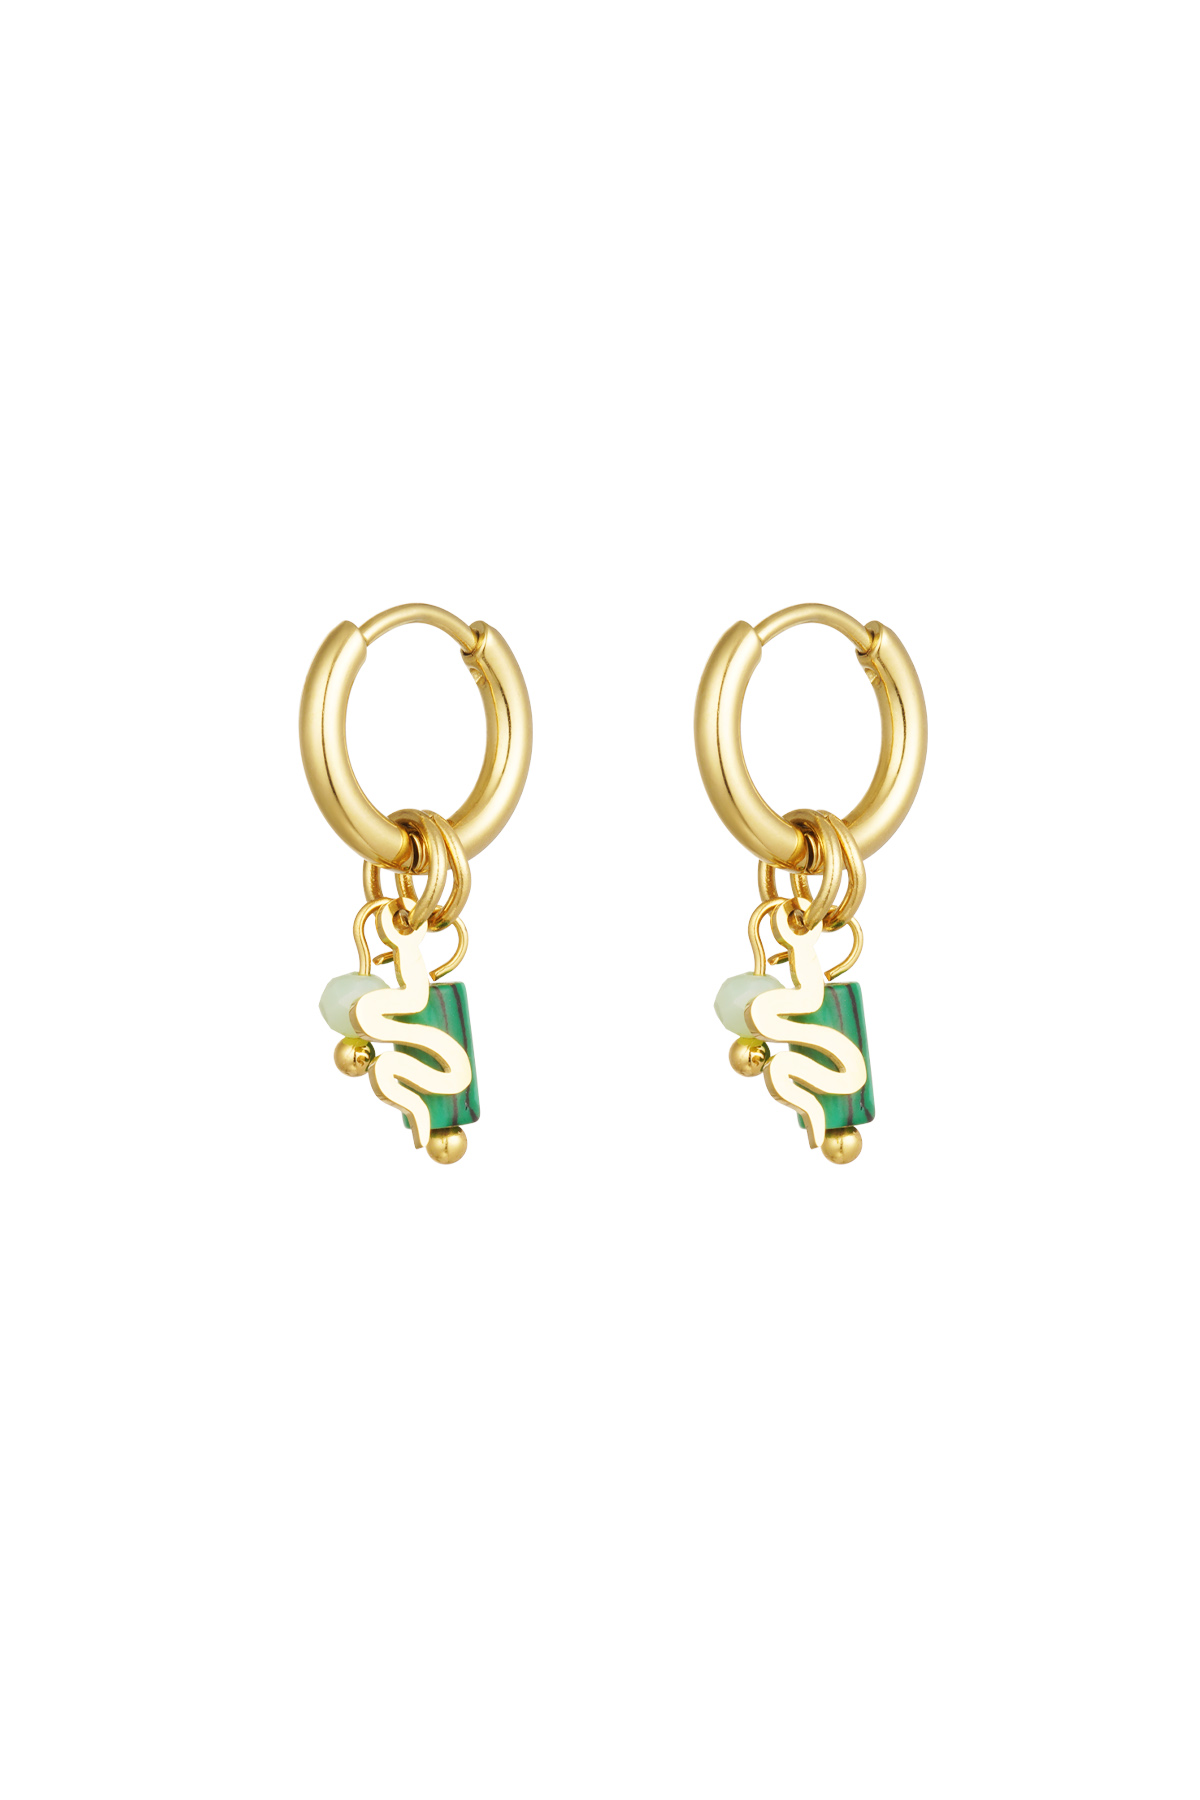 Earrings natural stone with snake detail - green gold 